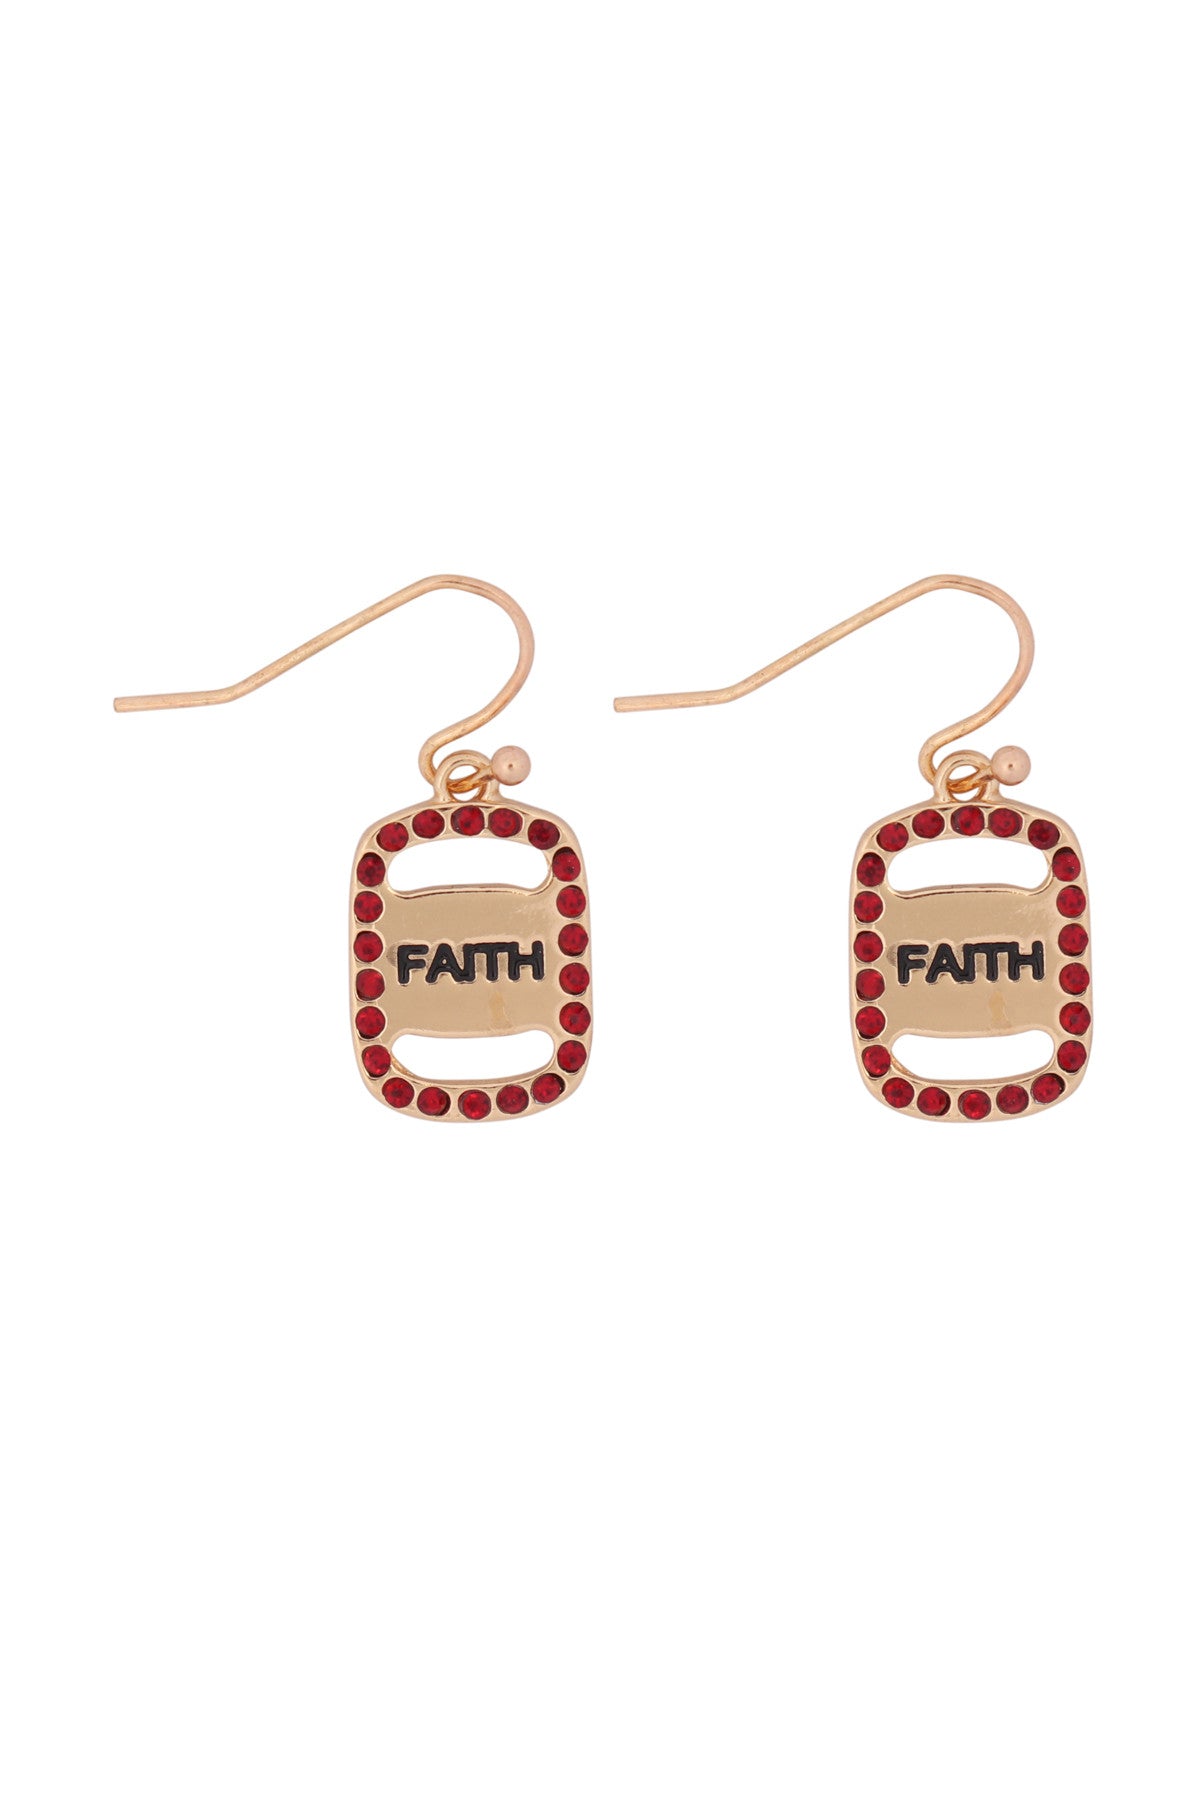 FAITH ETCHED DROP EARRINGS